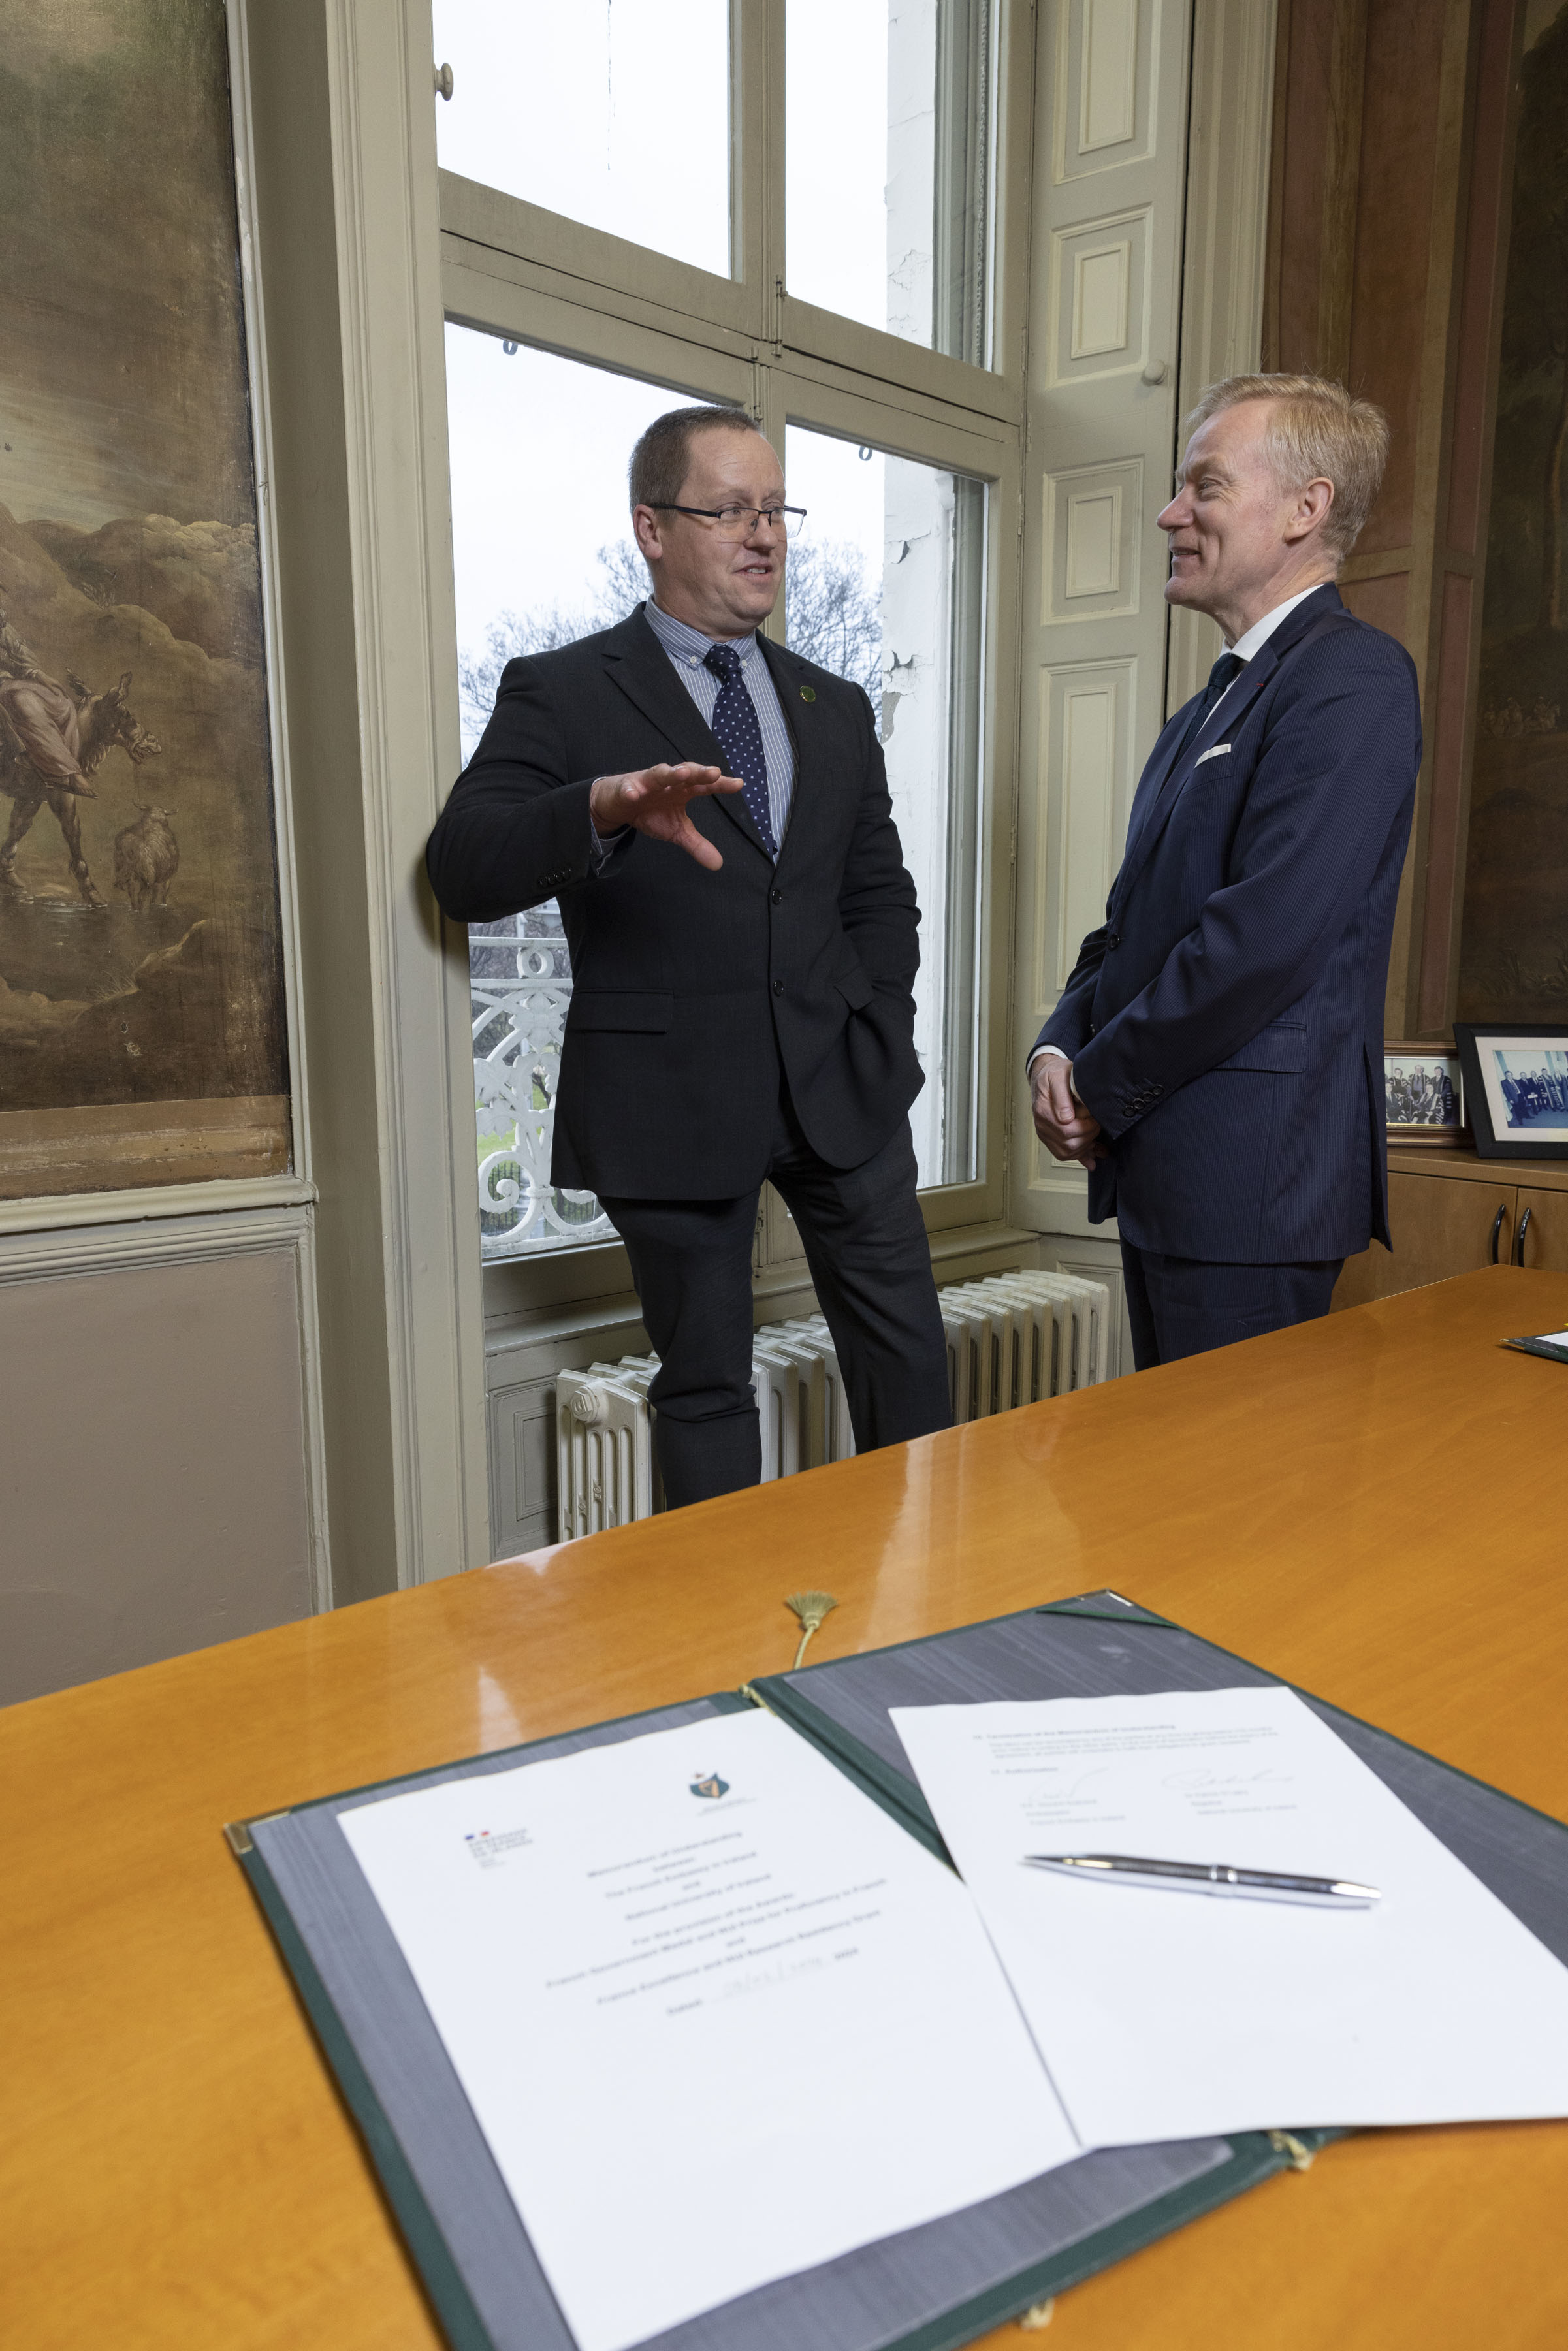 Dr Patrick O'Leary and H.E. Vincent Guérend chatting in the Registrar's Office of NUI’ seminar